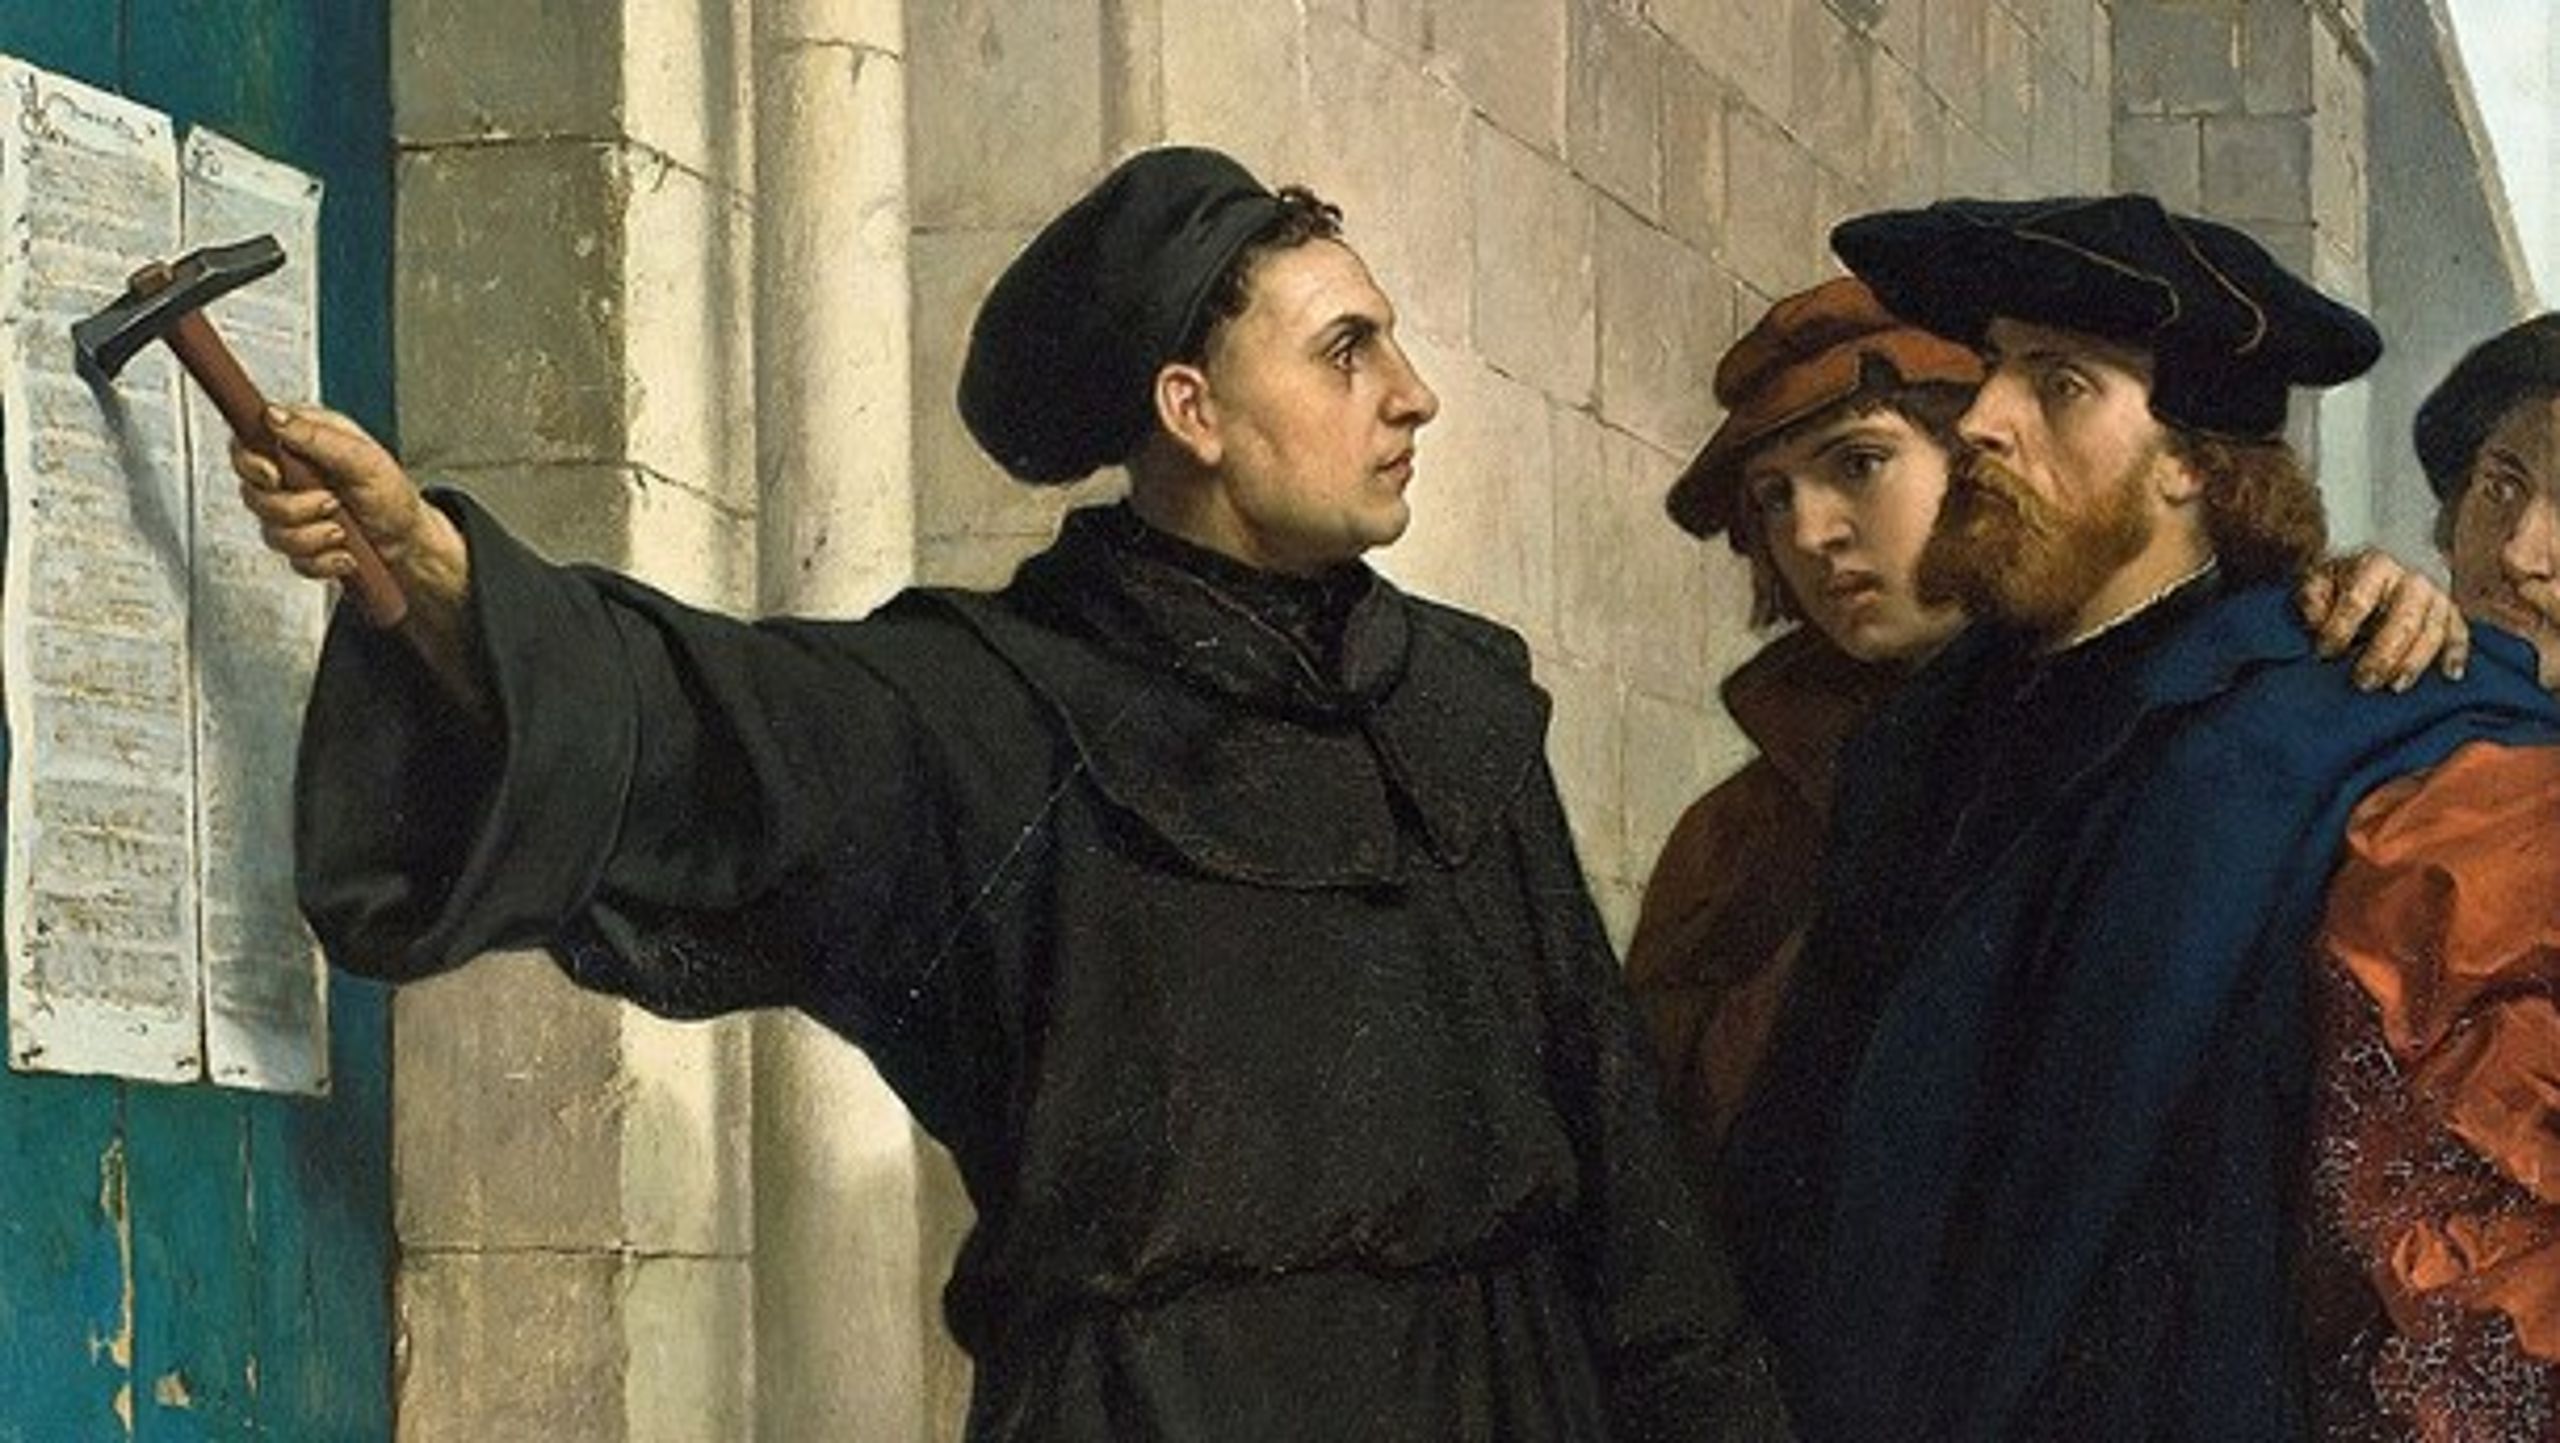 <a href="https://commons.wikimedia.org/wiki/File%3ALuther95theses.jpg" target="_blank" rel="nofollow">Ferdinand Pauwels via Wikimedia Commons</a>